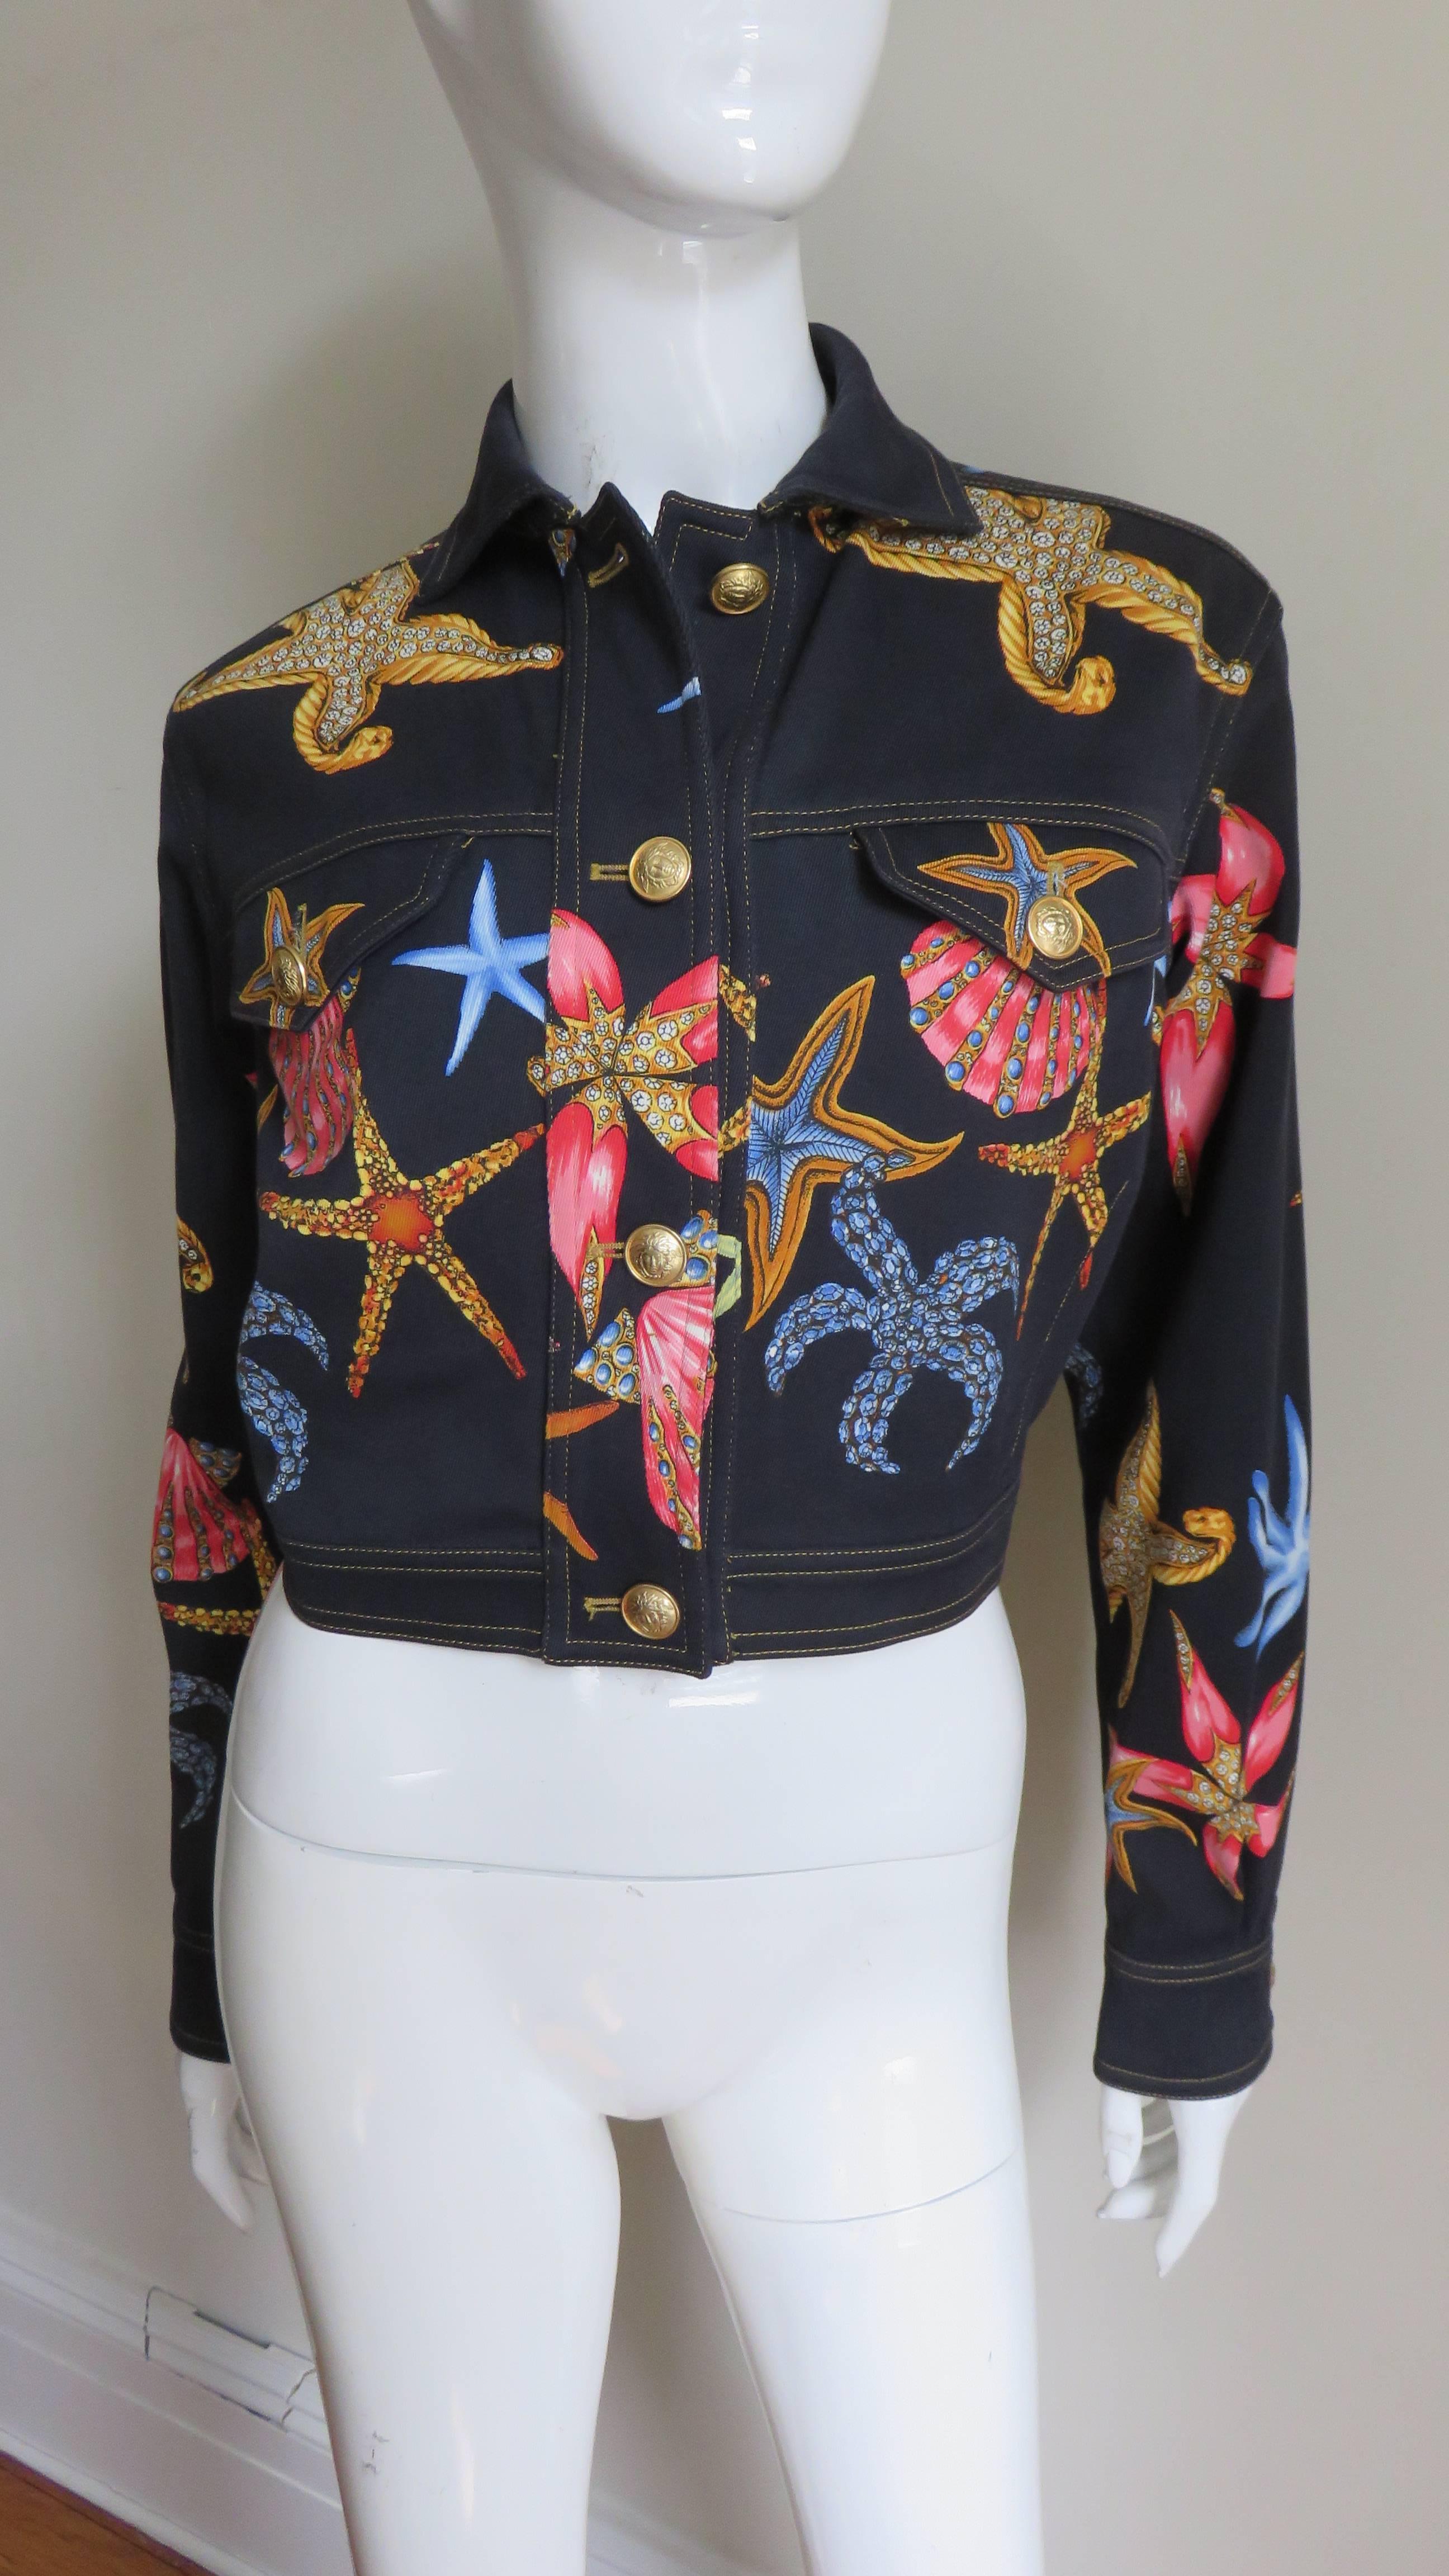 Gianni Versace Starfish Jacket S/S 1992 In Excellent Condition For Sale In Water Mill, NY